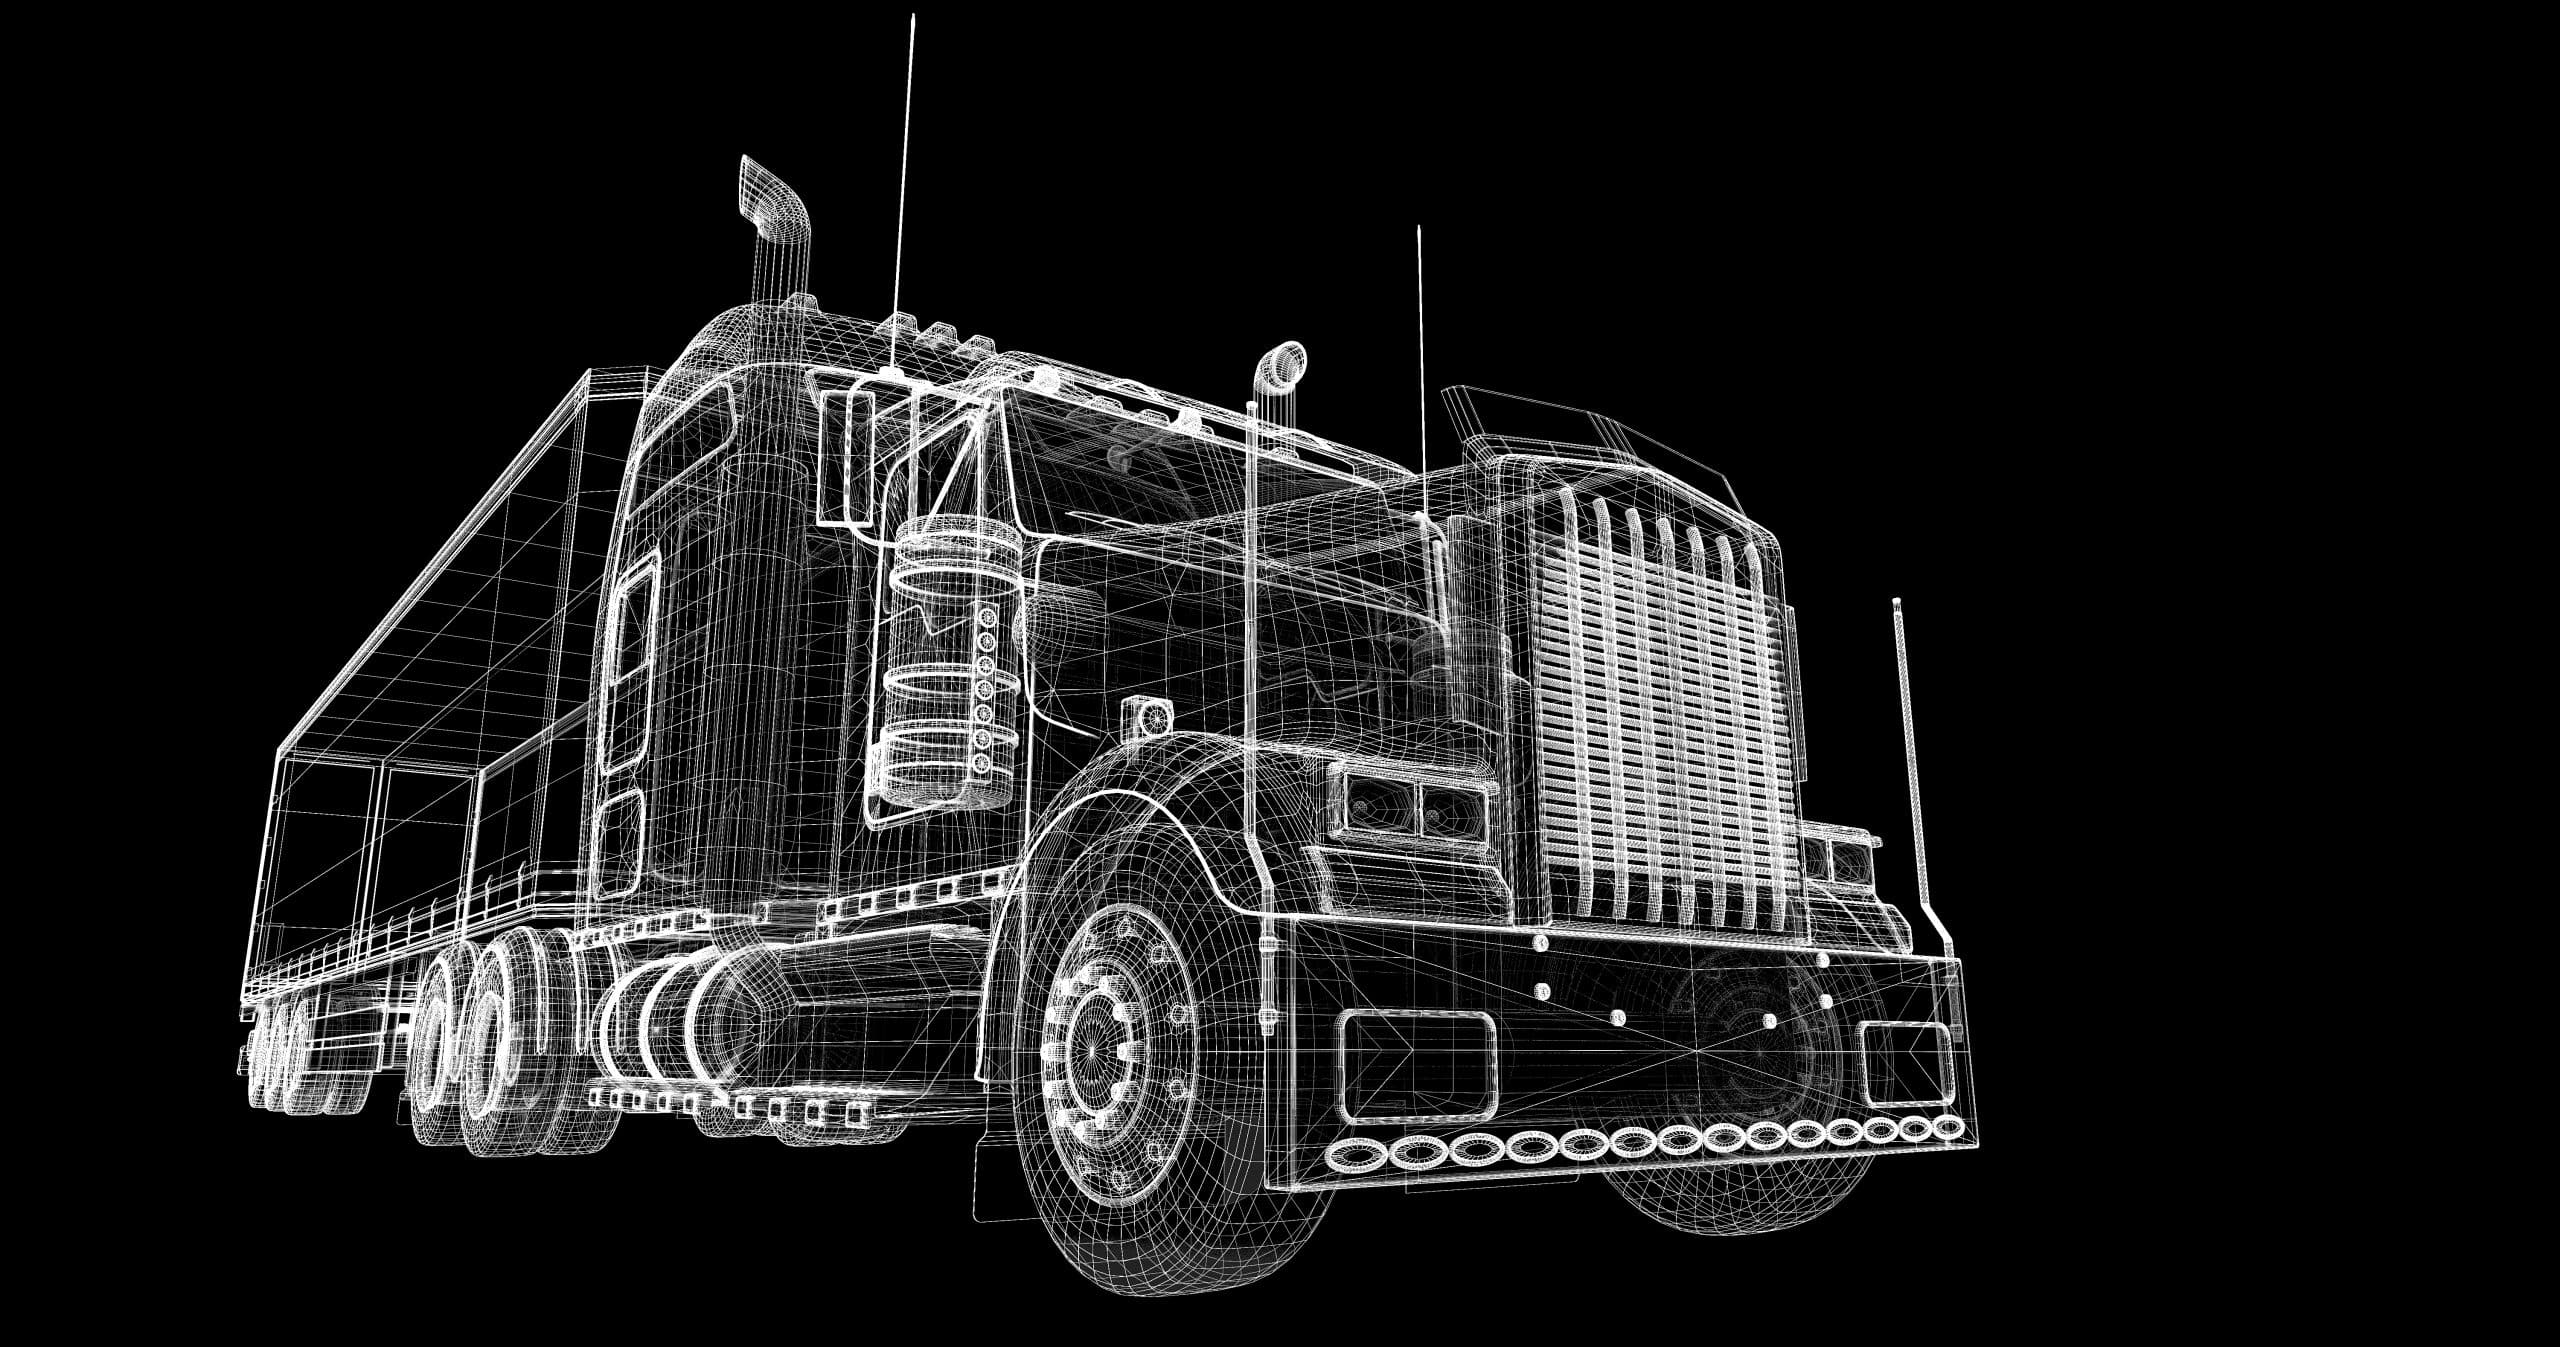 Comparing different 3-D profiling computer software options for truck washing